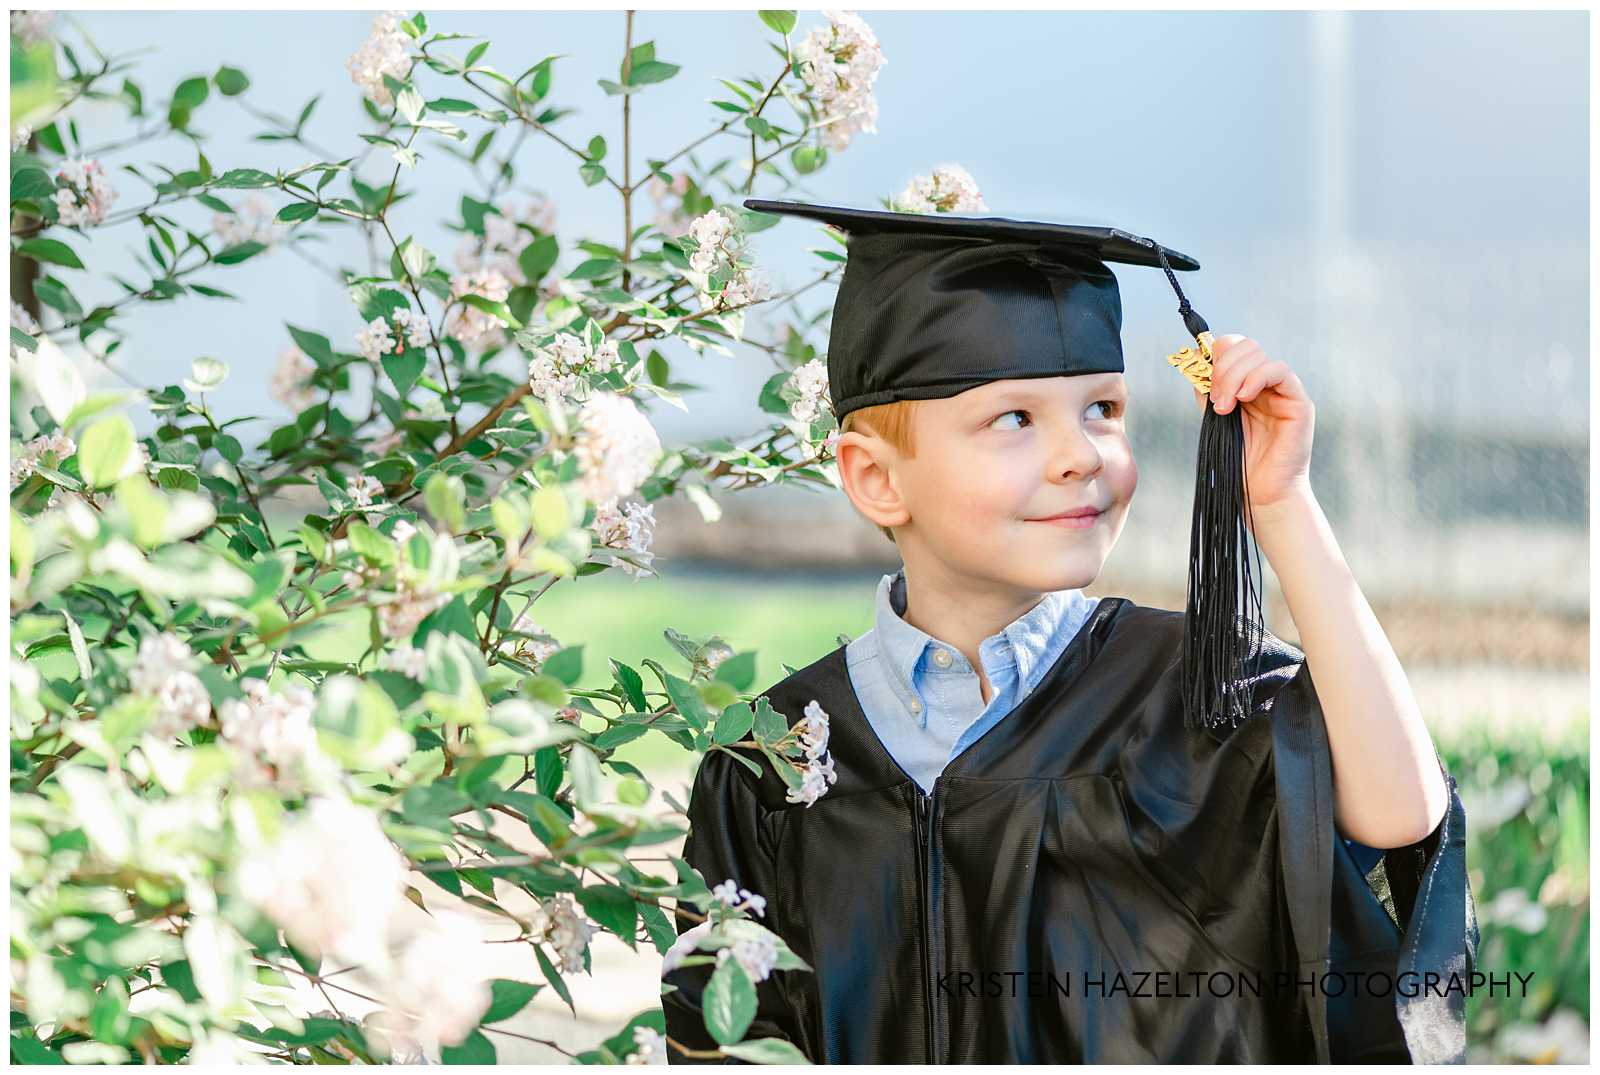 6 Tips to Have the Best Graduation Photoshoot | Flytographer